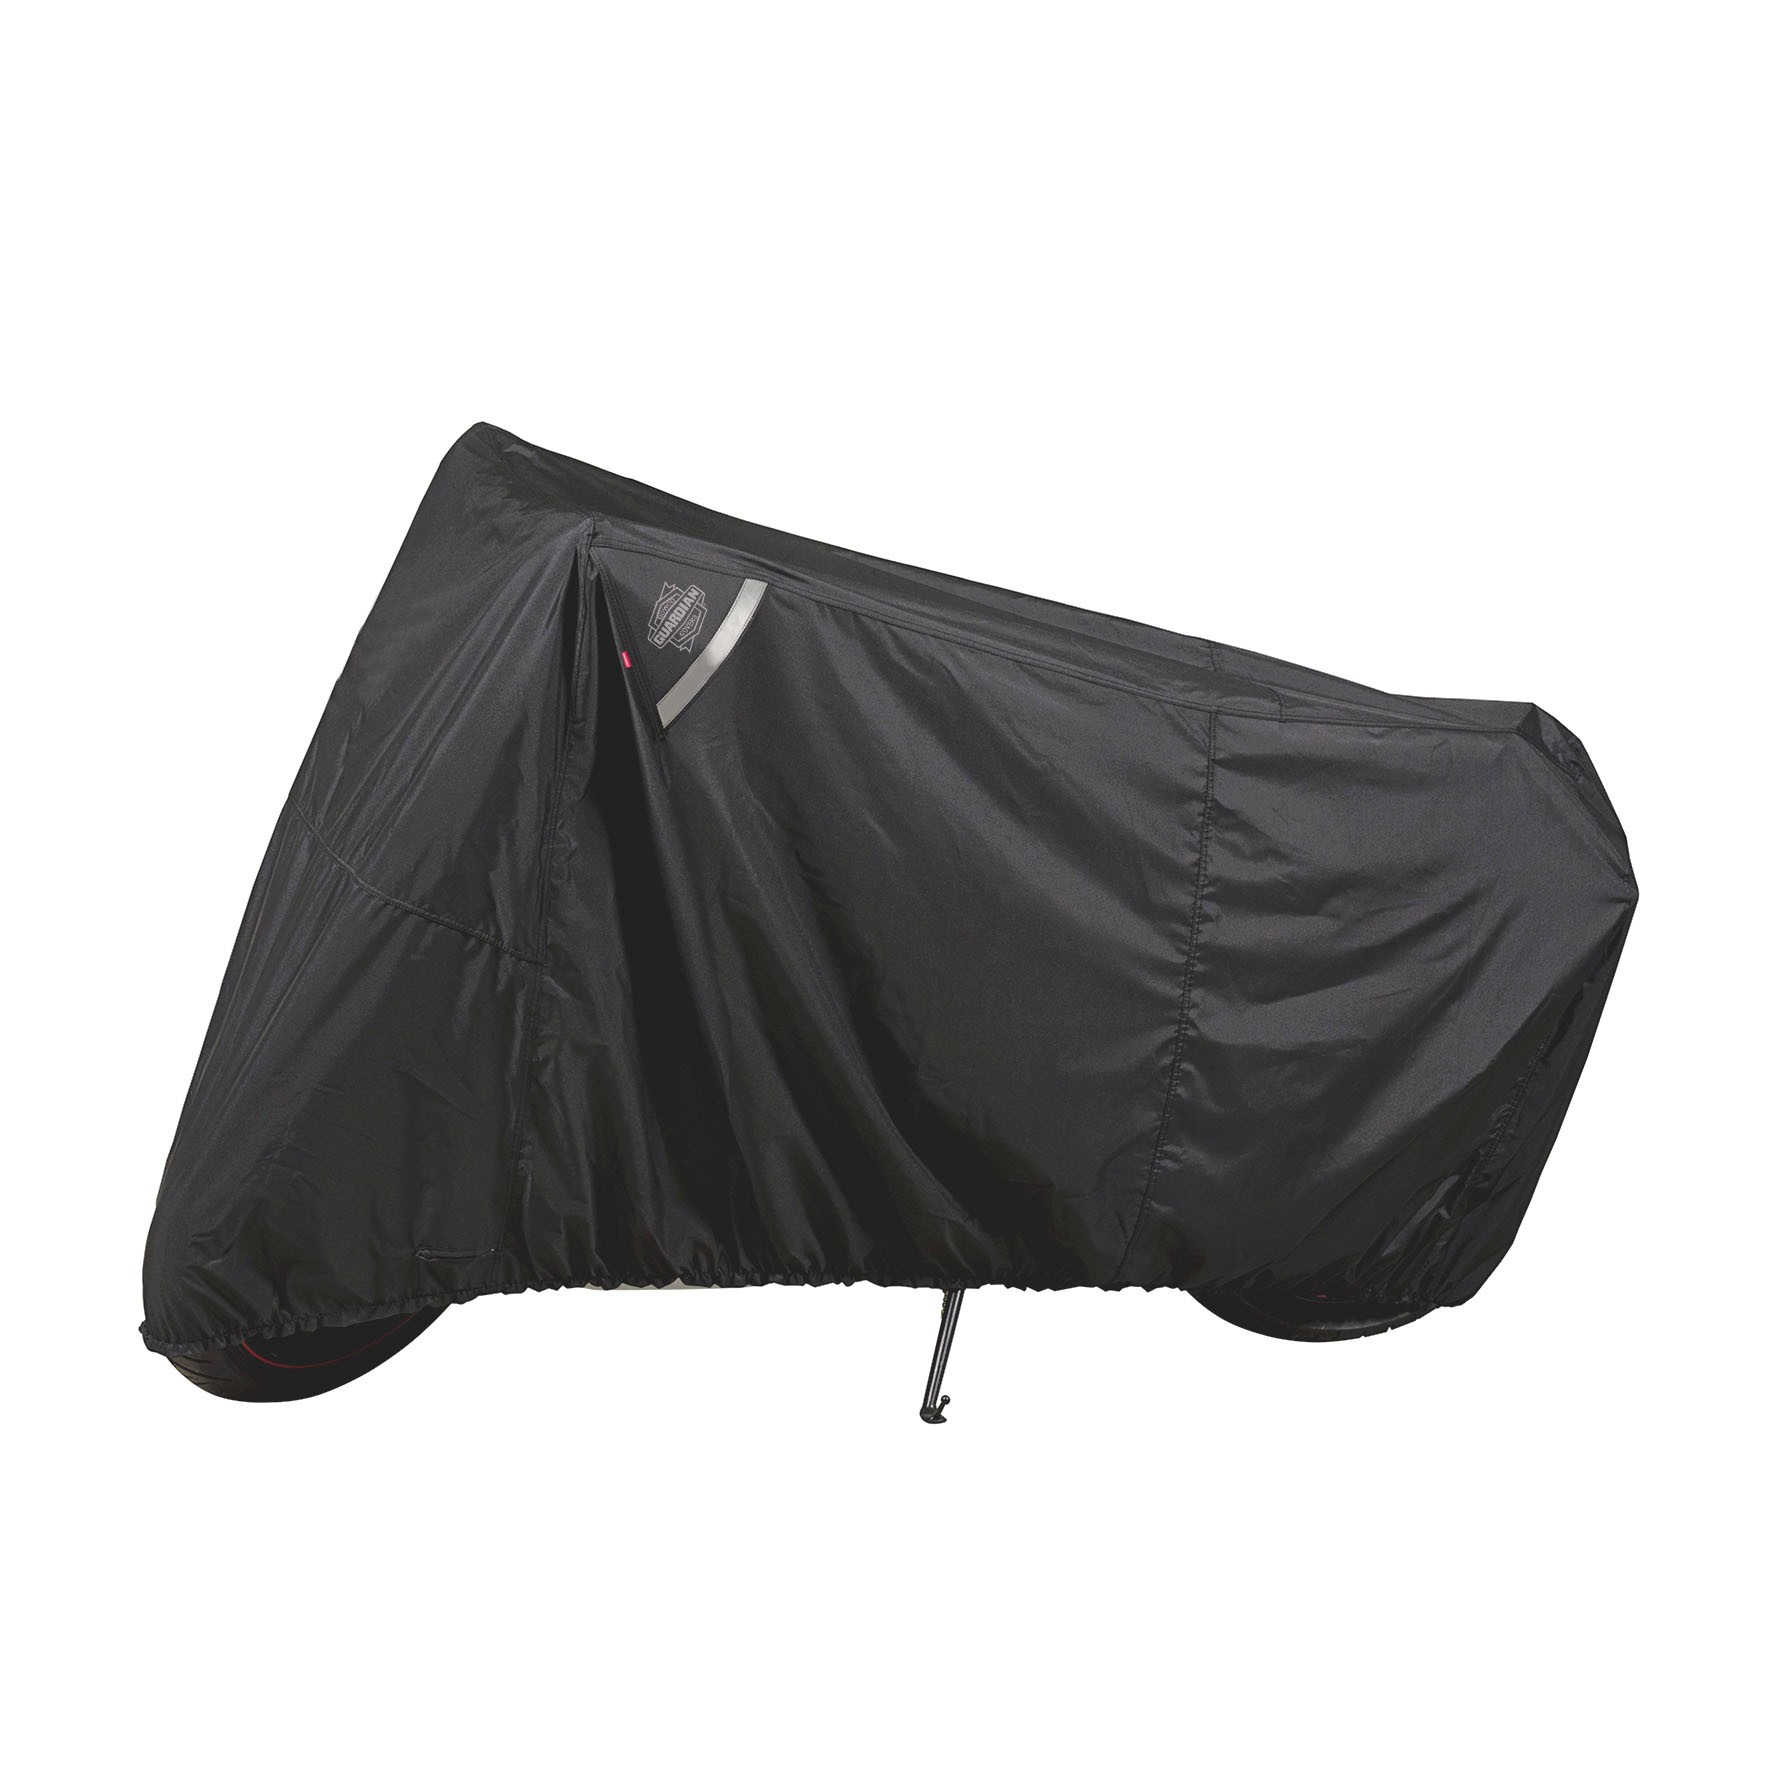 Dowco Guardian WeatherAll Plus Motorcycle Cover for Sport Bikes